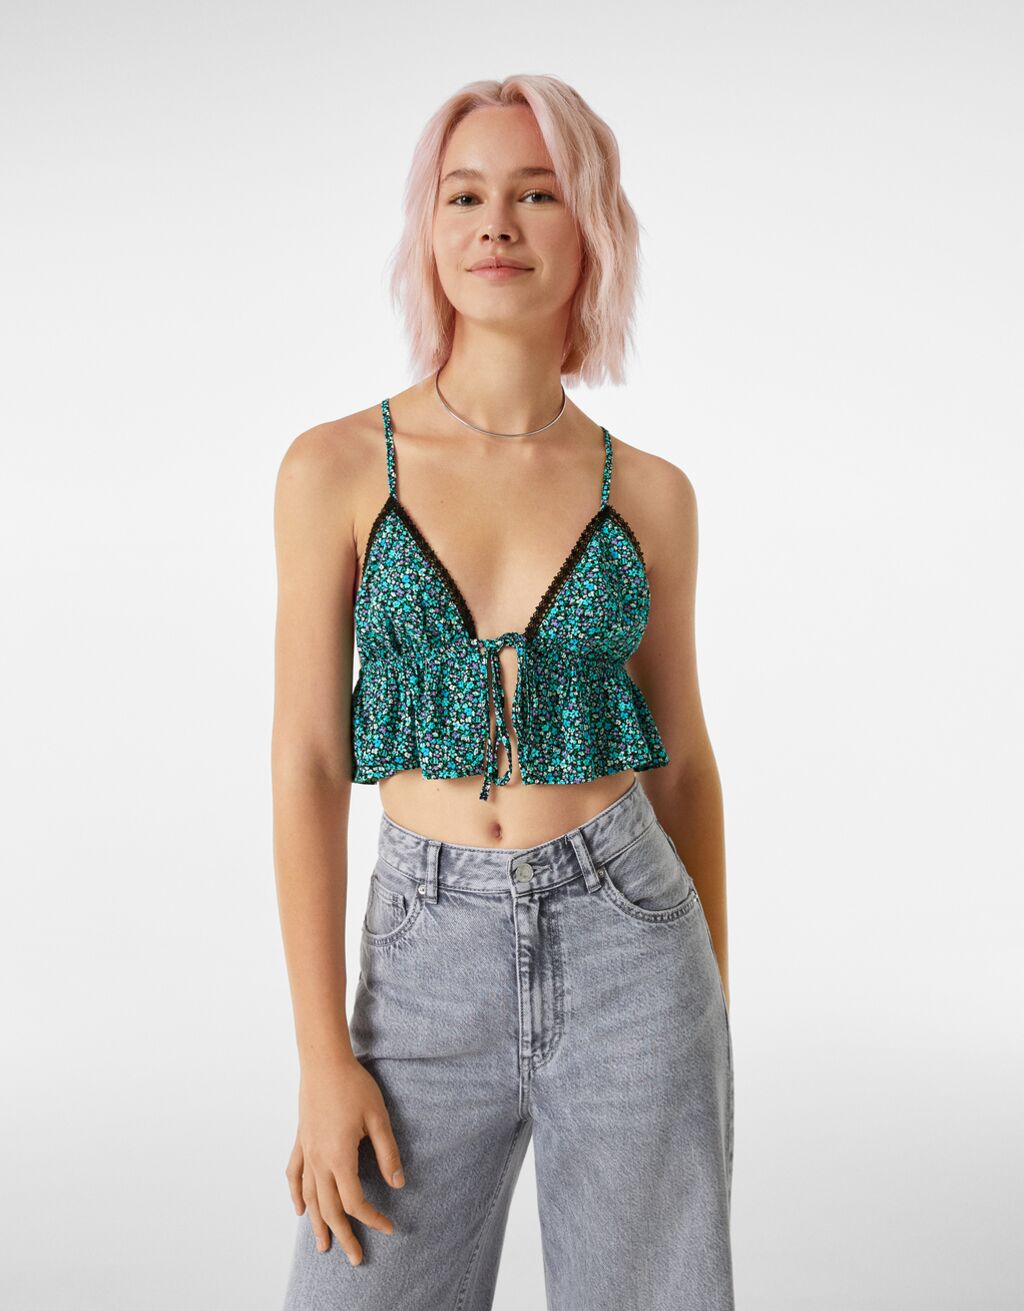 Crepe top with lace trim along the neckline